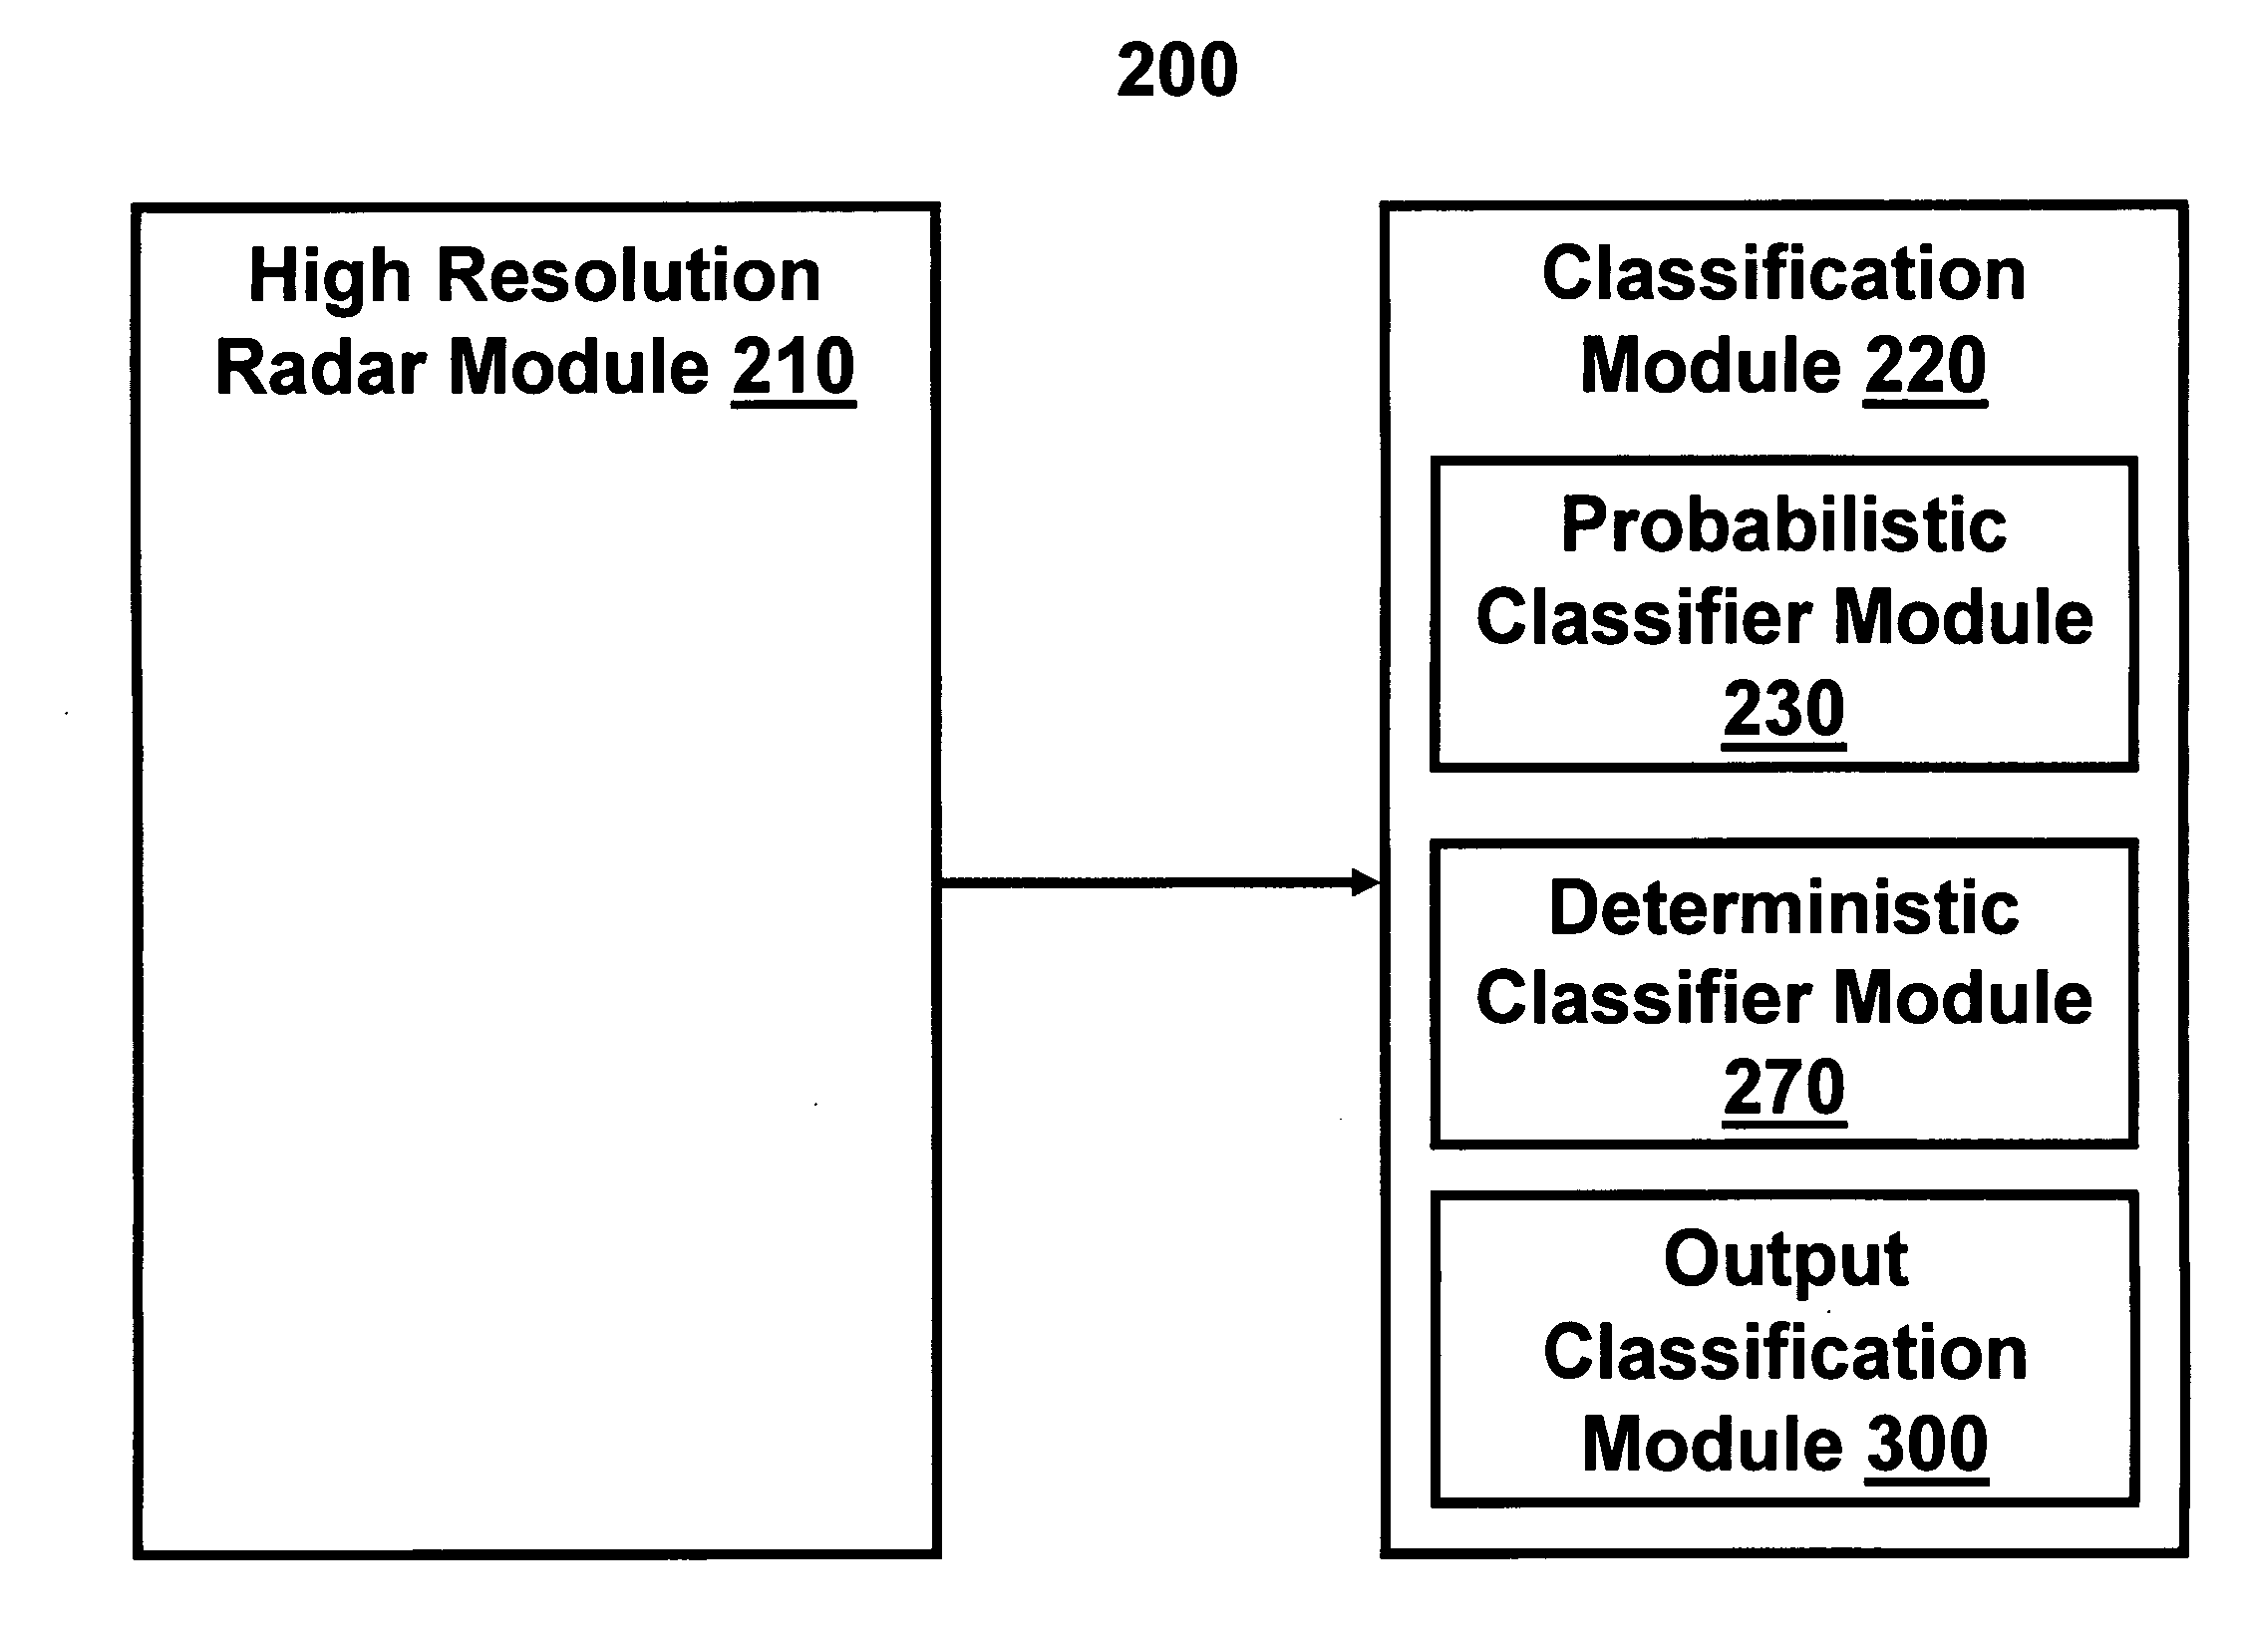 Method for building robust algorithms that classify objects using high-resolution radar signals